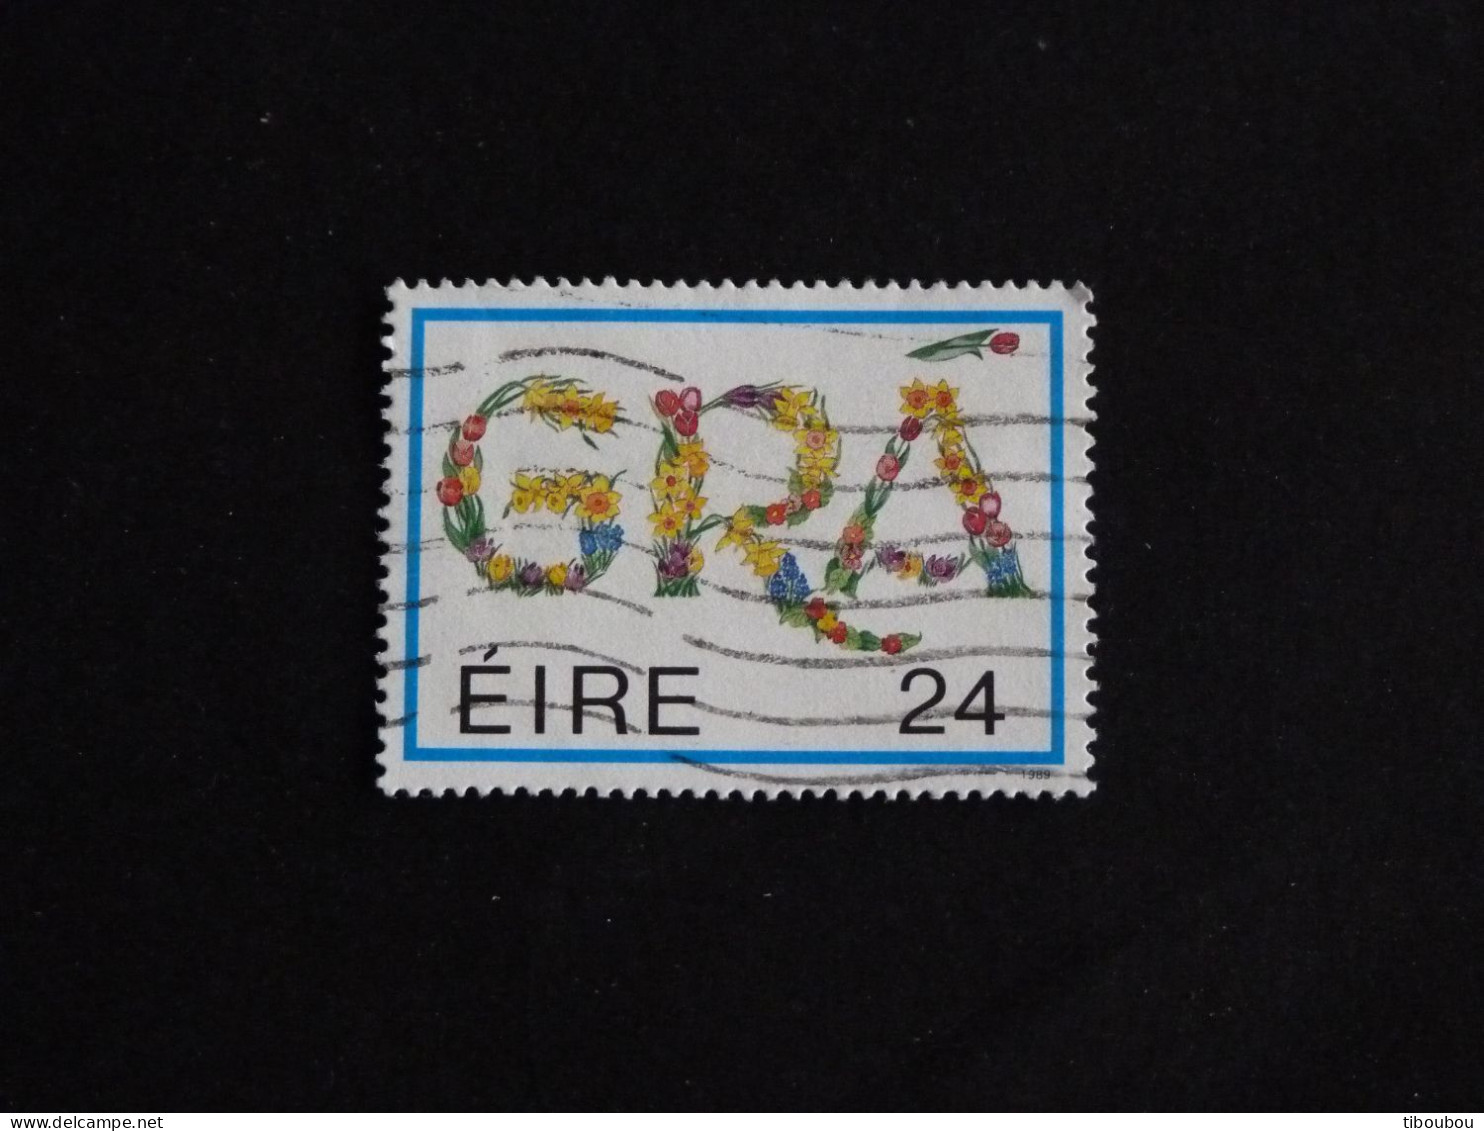 IRLANDE IRELAND EIRE YT 672 OBLITERE - MESSAGE AMOUR GRA - Used Stamps